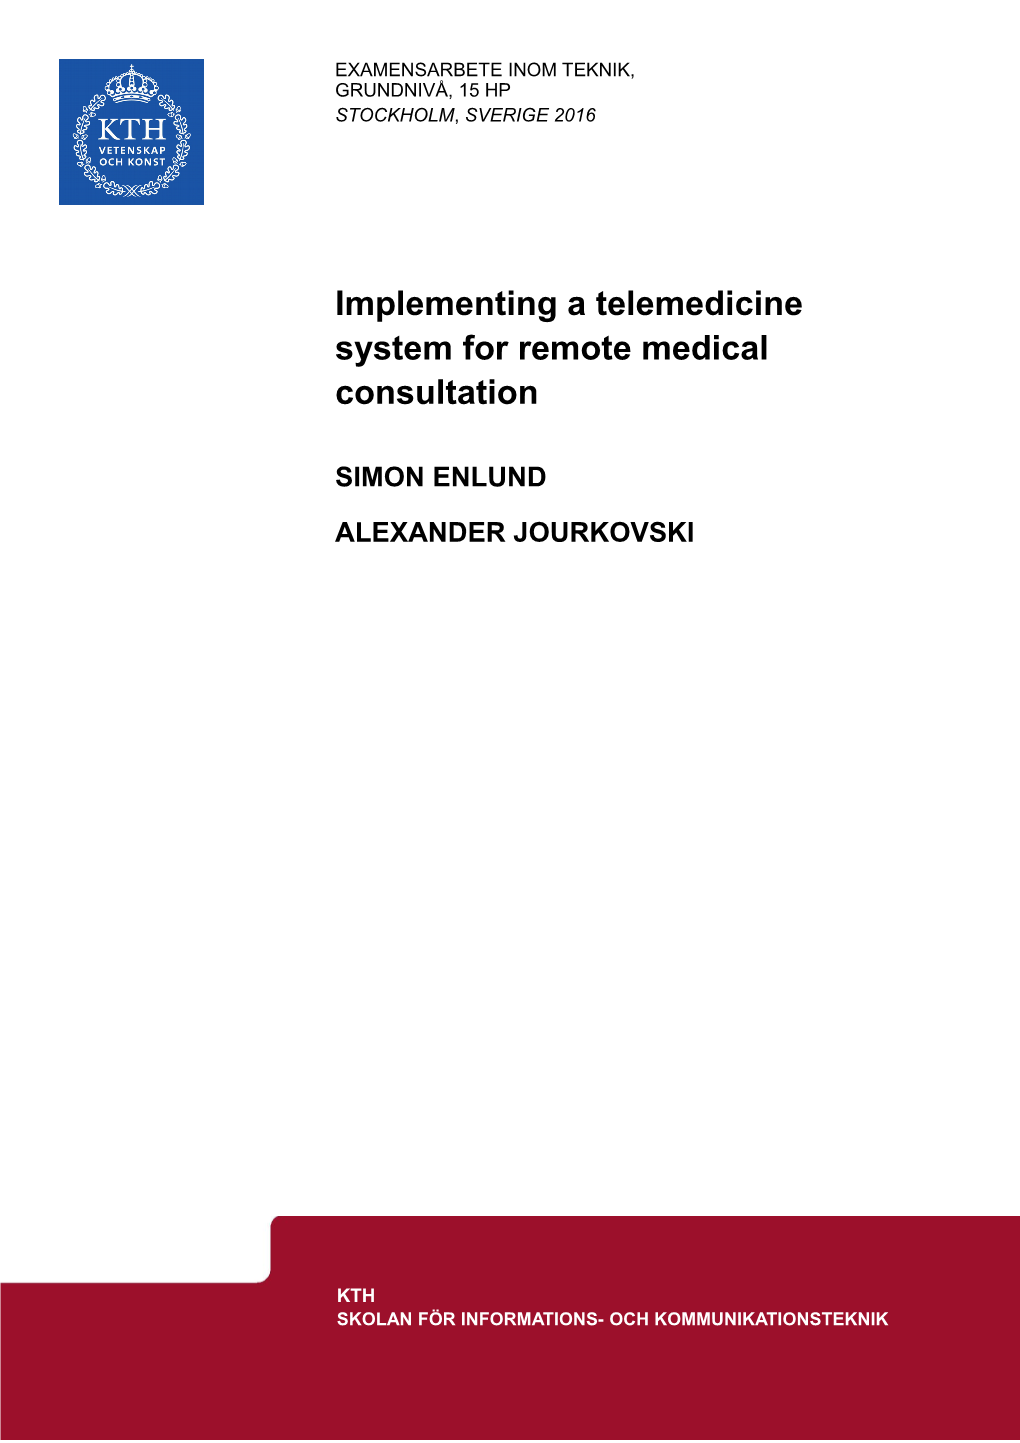 Implementing a Telemedicine System for Remote Medical Consultation